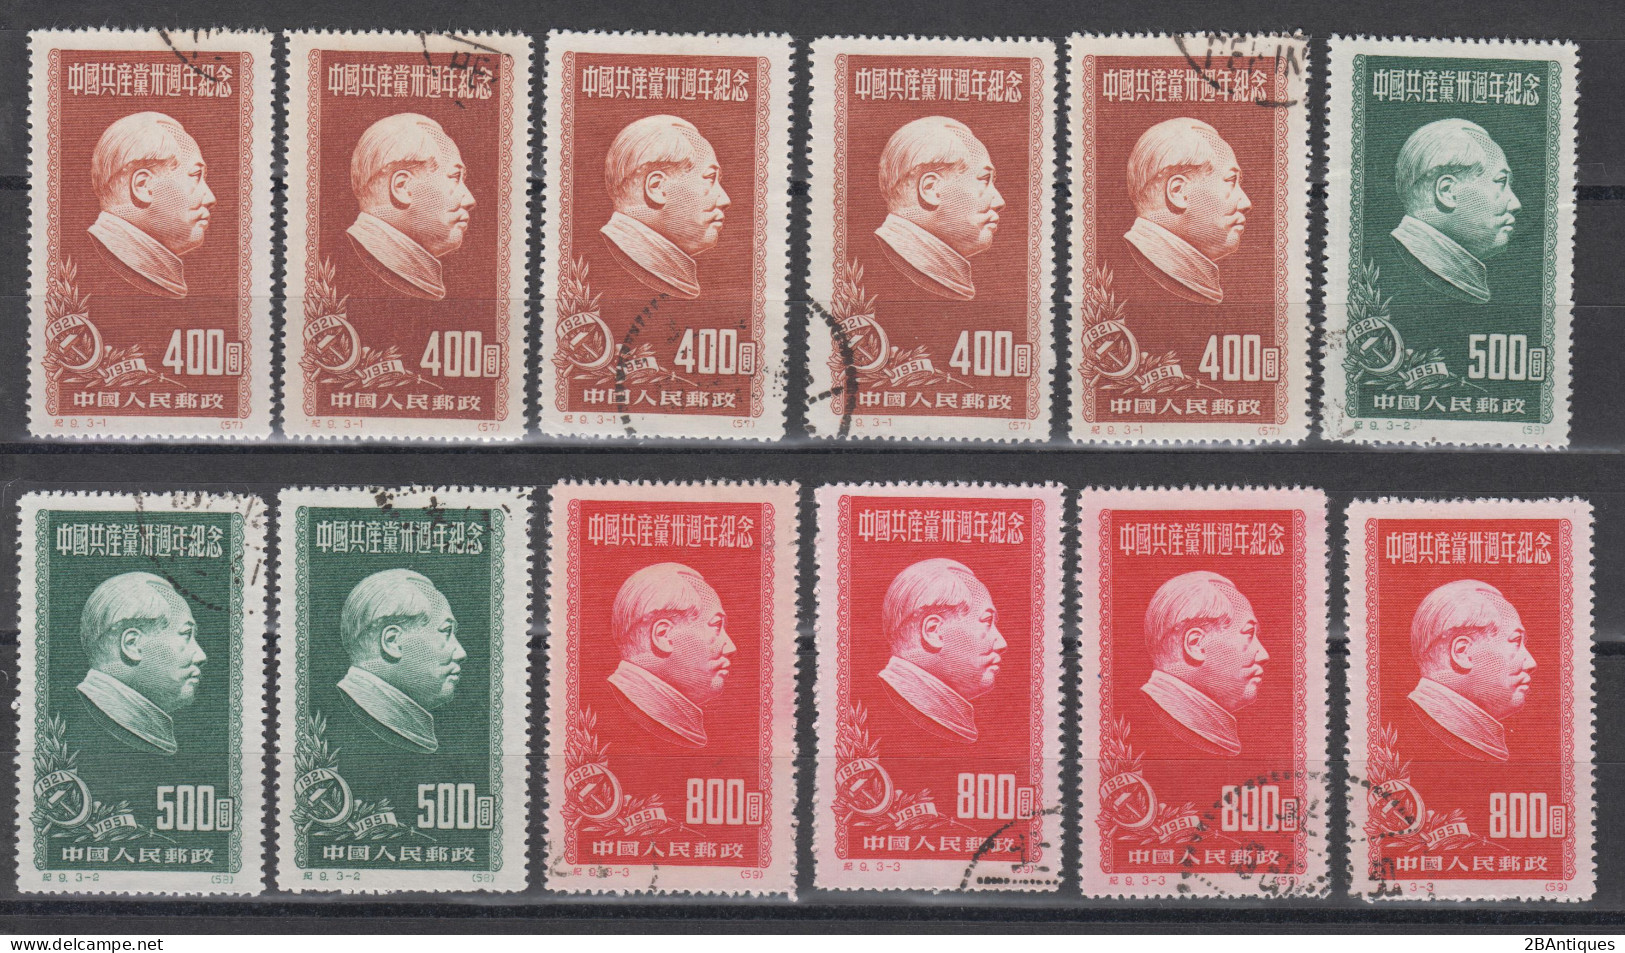 PR CHINA 1951 - The 30th Anniversary Of The Communist Party Of China - Mao Zedong CTO 12 Stamps - Usati